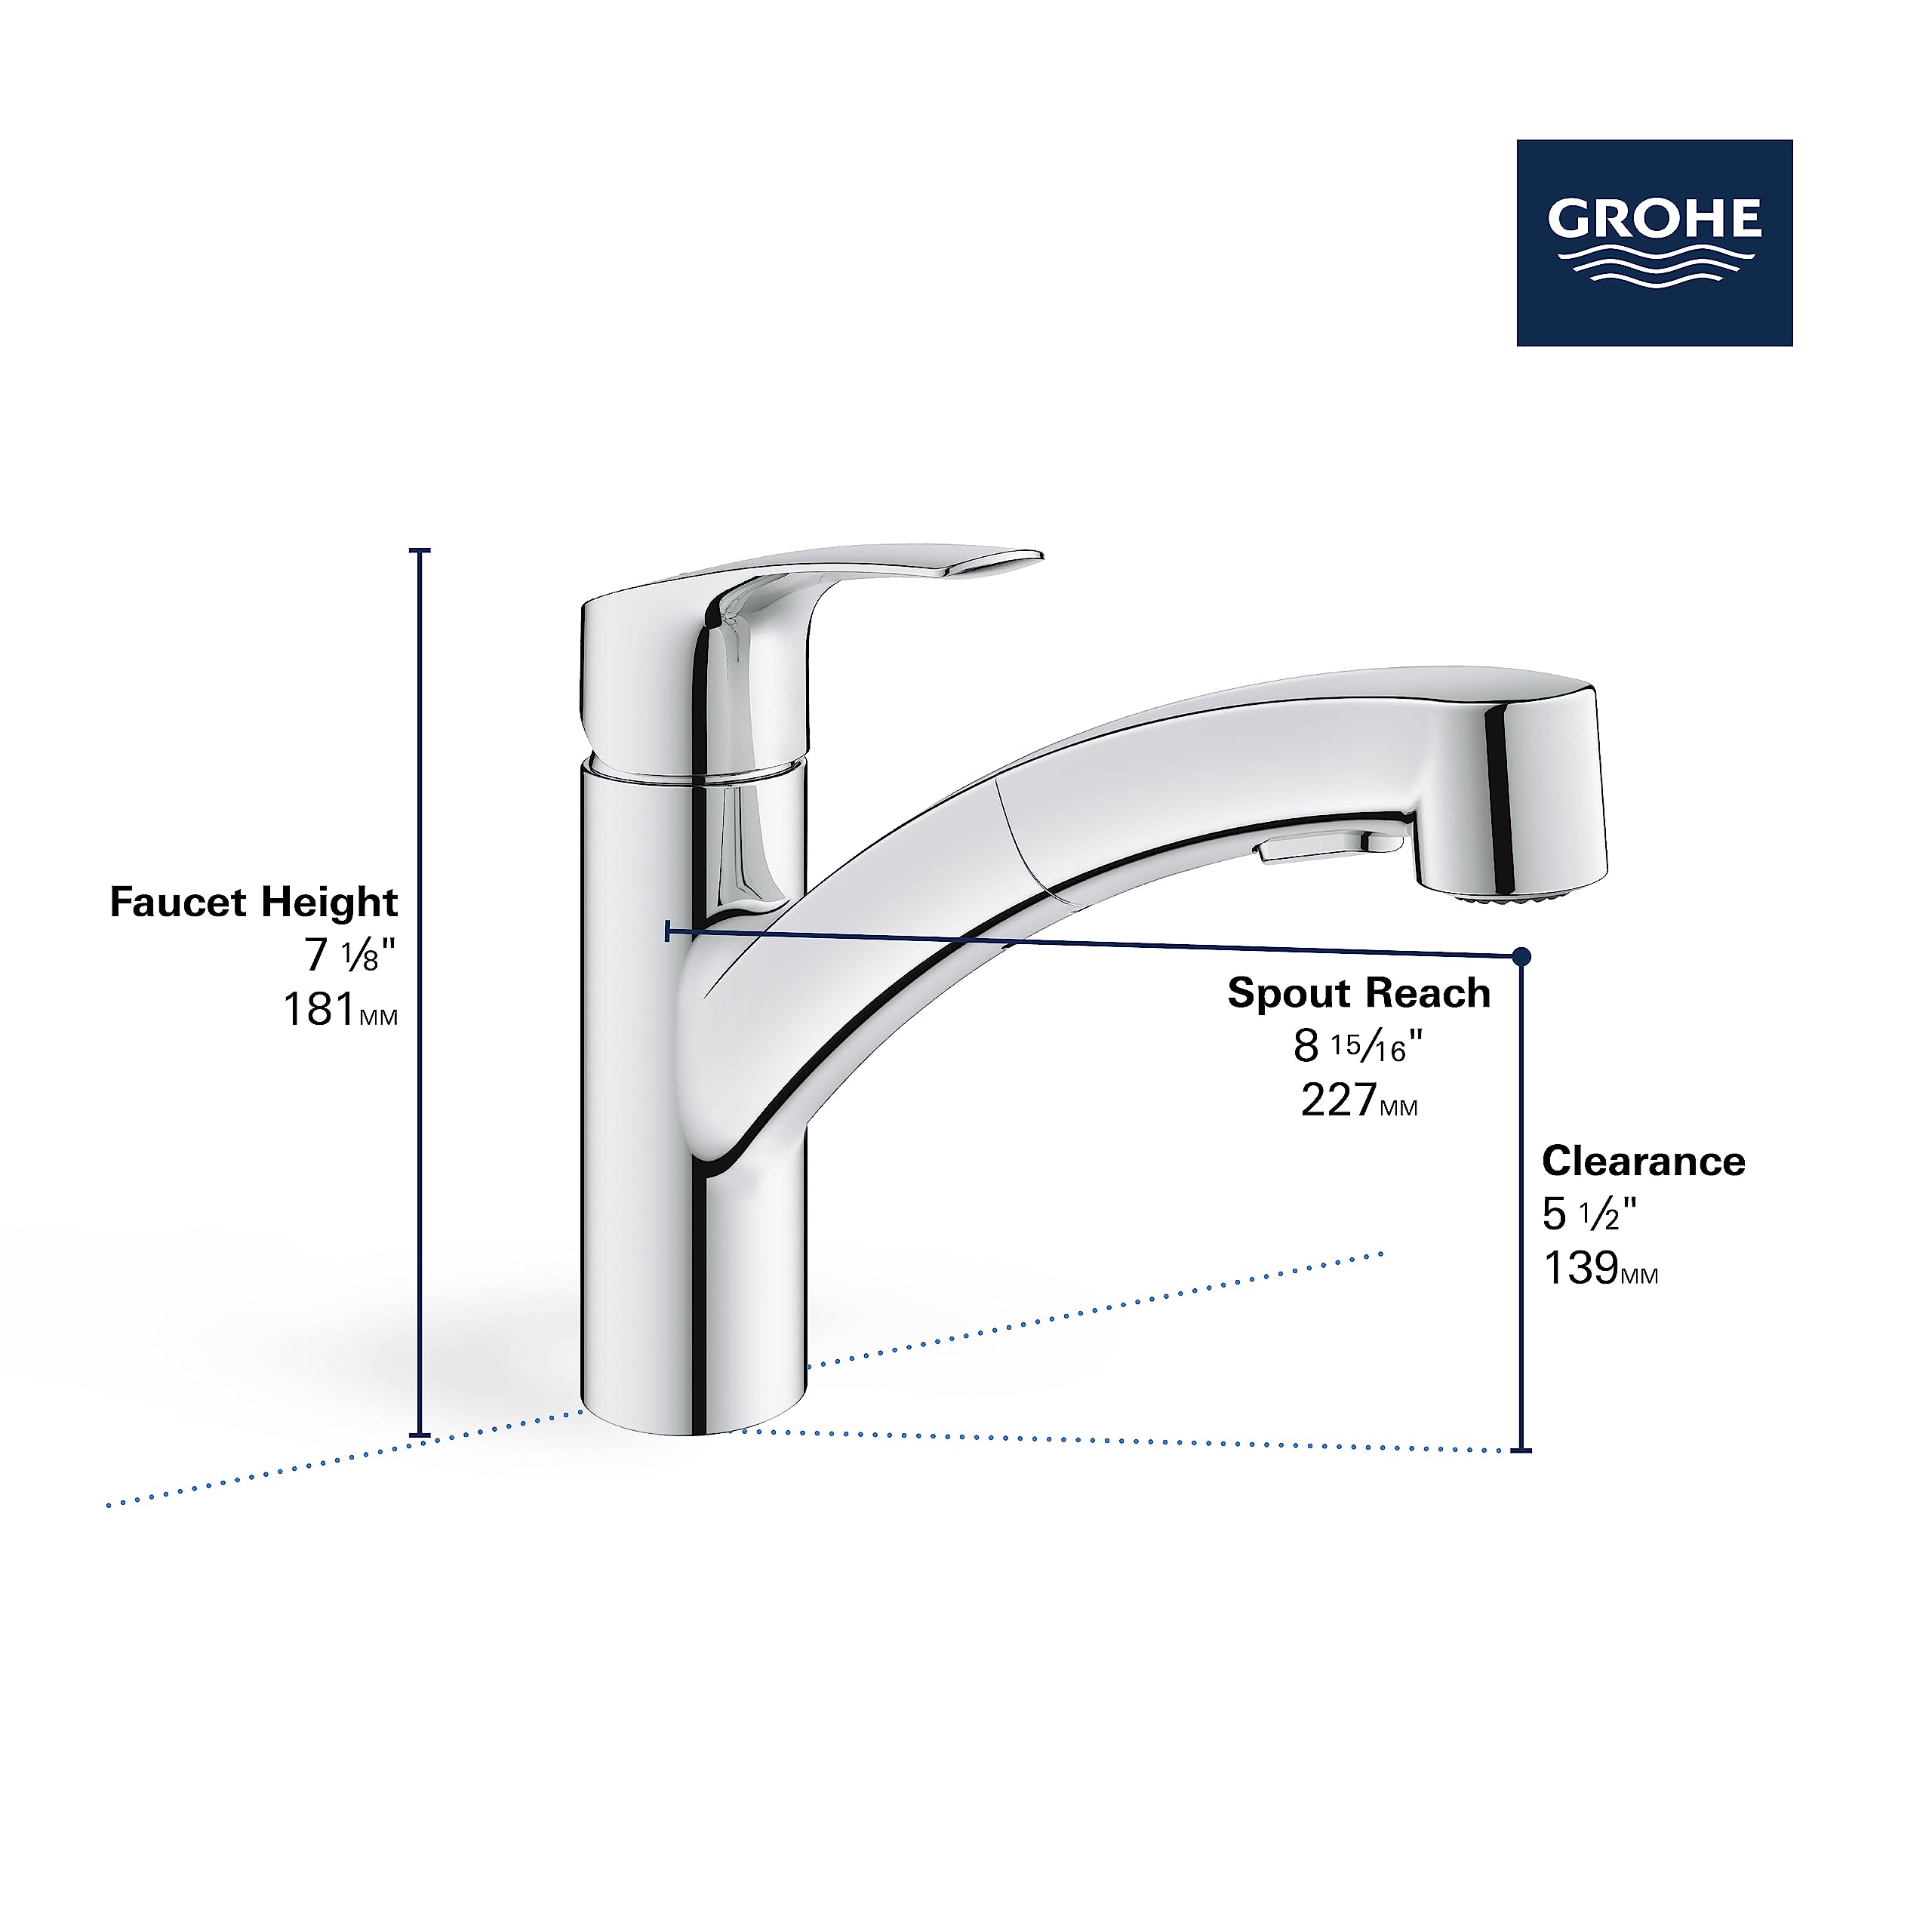 GROHE 30306DC1 Eurosmart Dual Spray Pull-Out Kitchen Faucet with sprayer Supersteel (Stainless Steel)